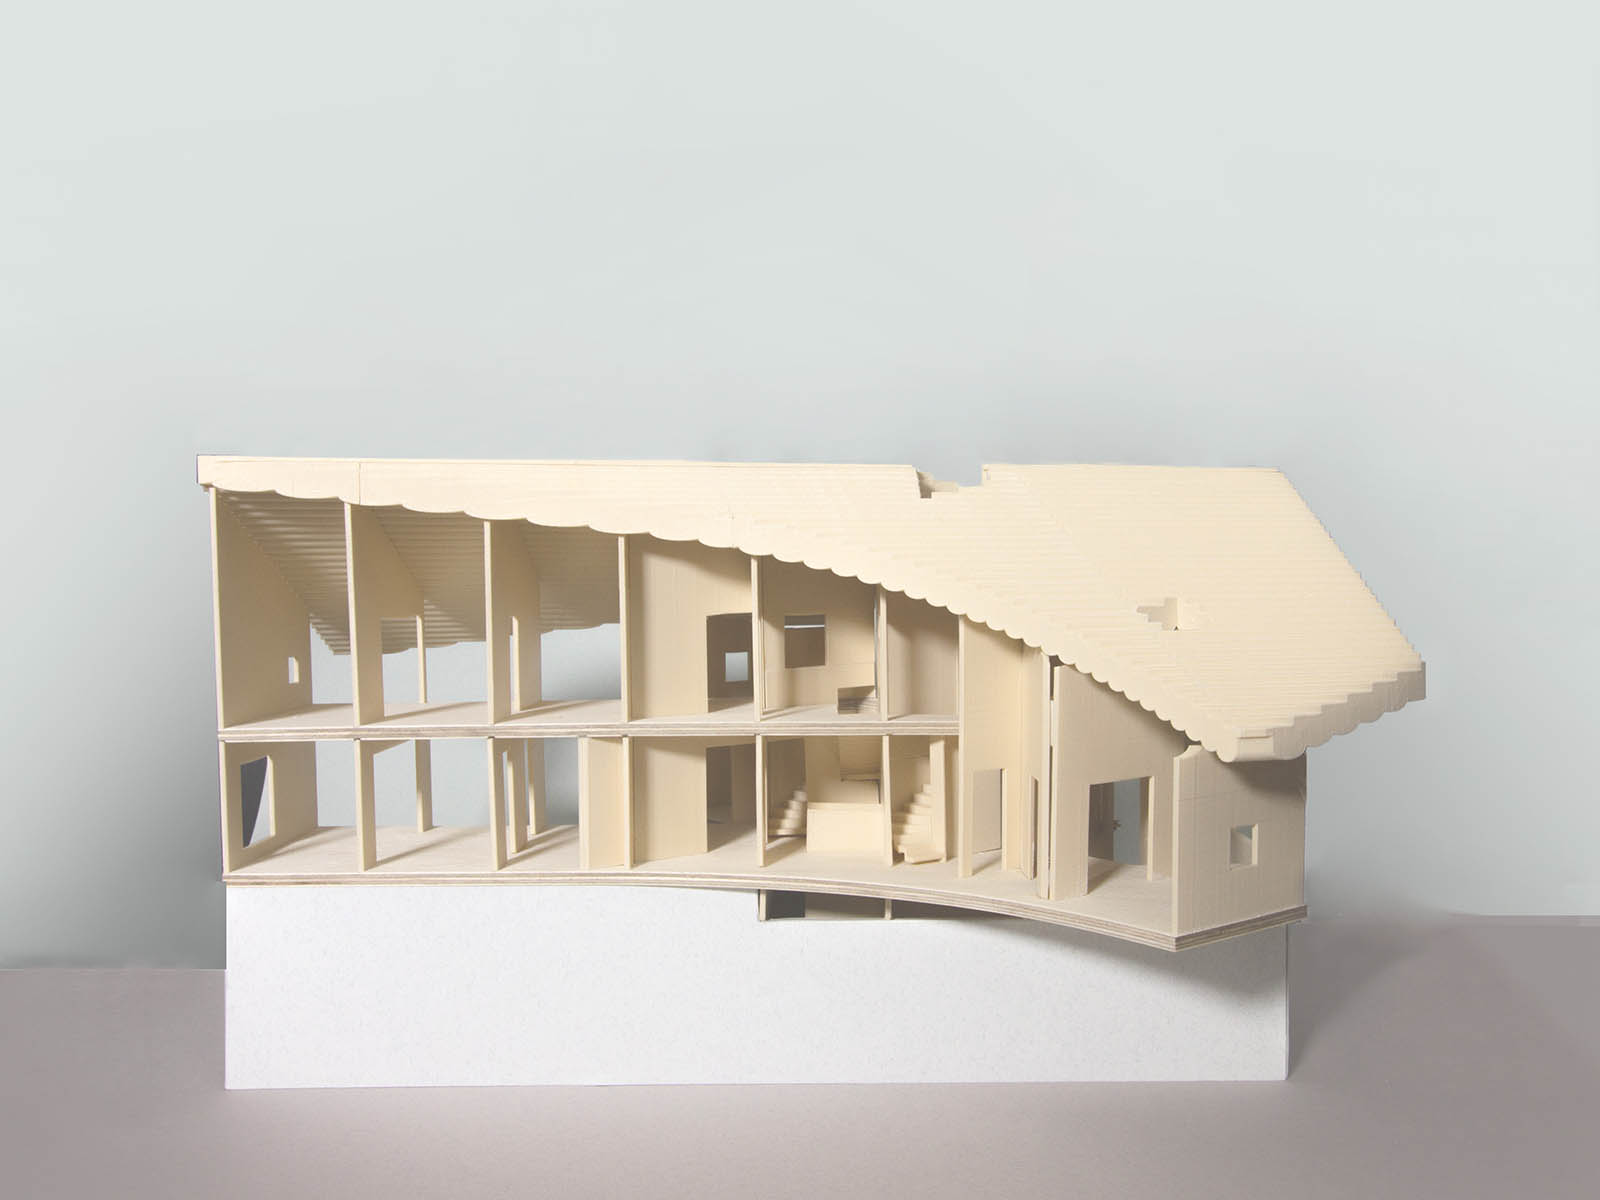 Anna Kaertner took advantage of CLT malleability to generate curvatures and a scalloped roof for "Big/Little House"